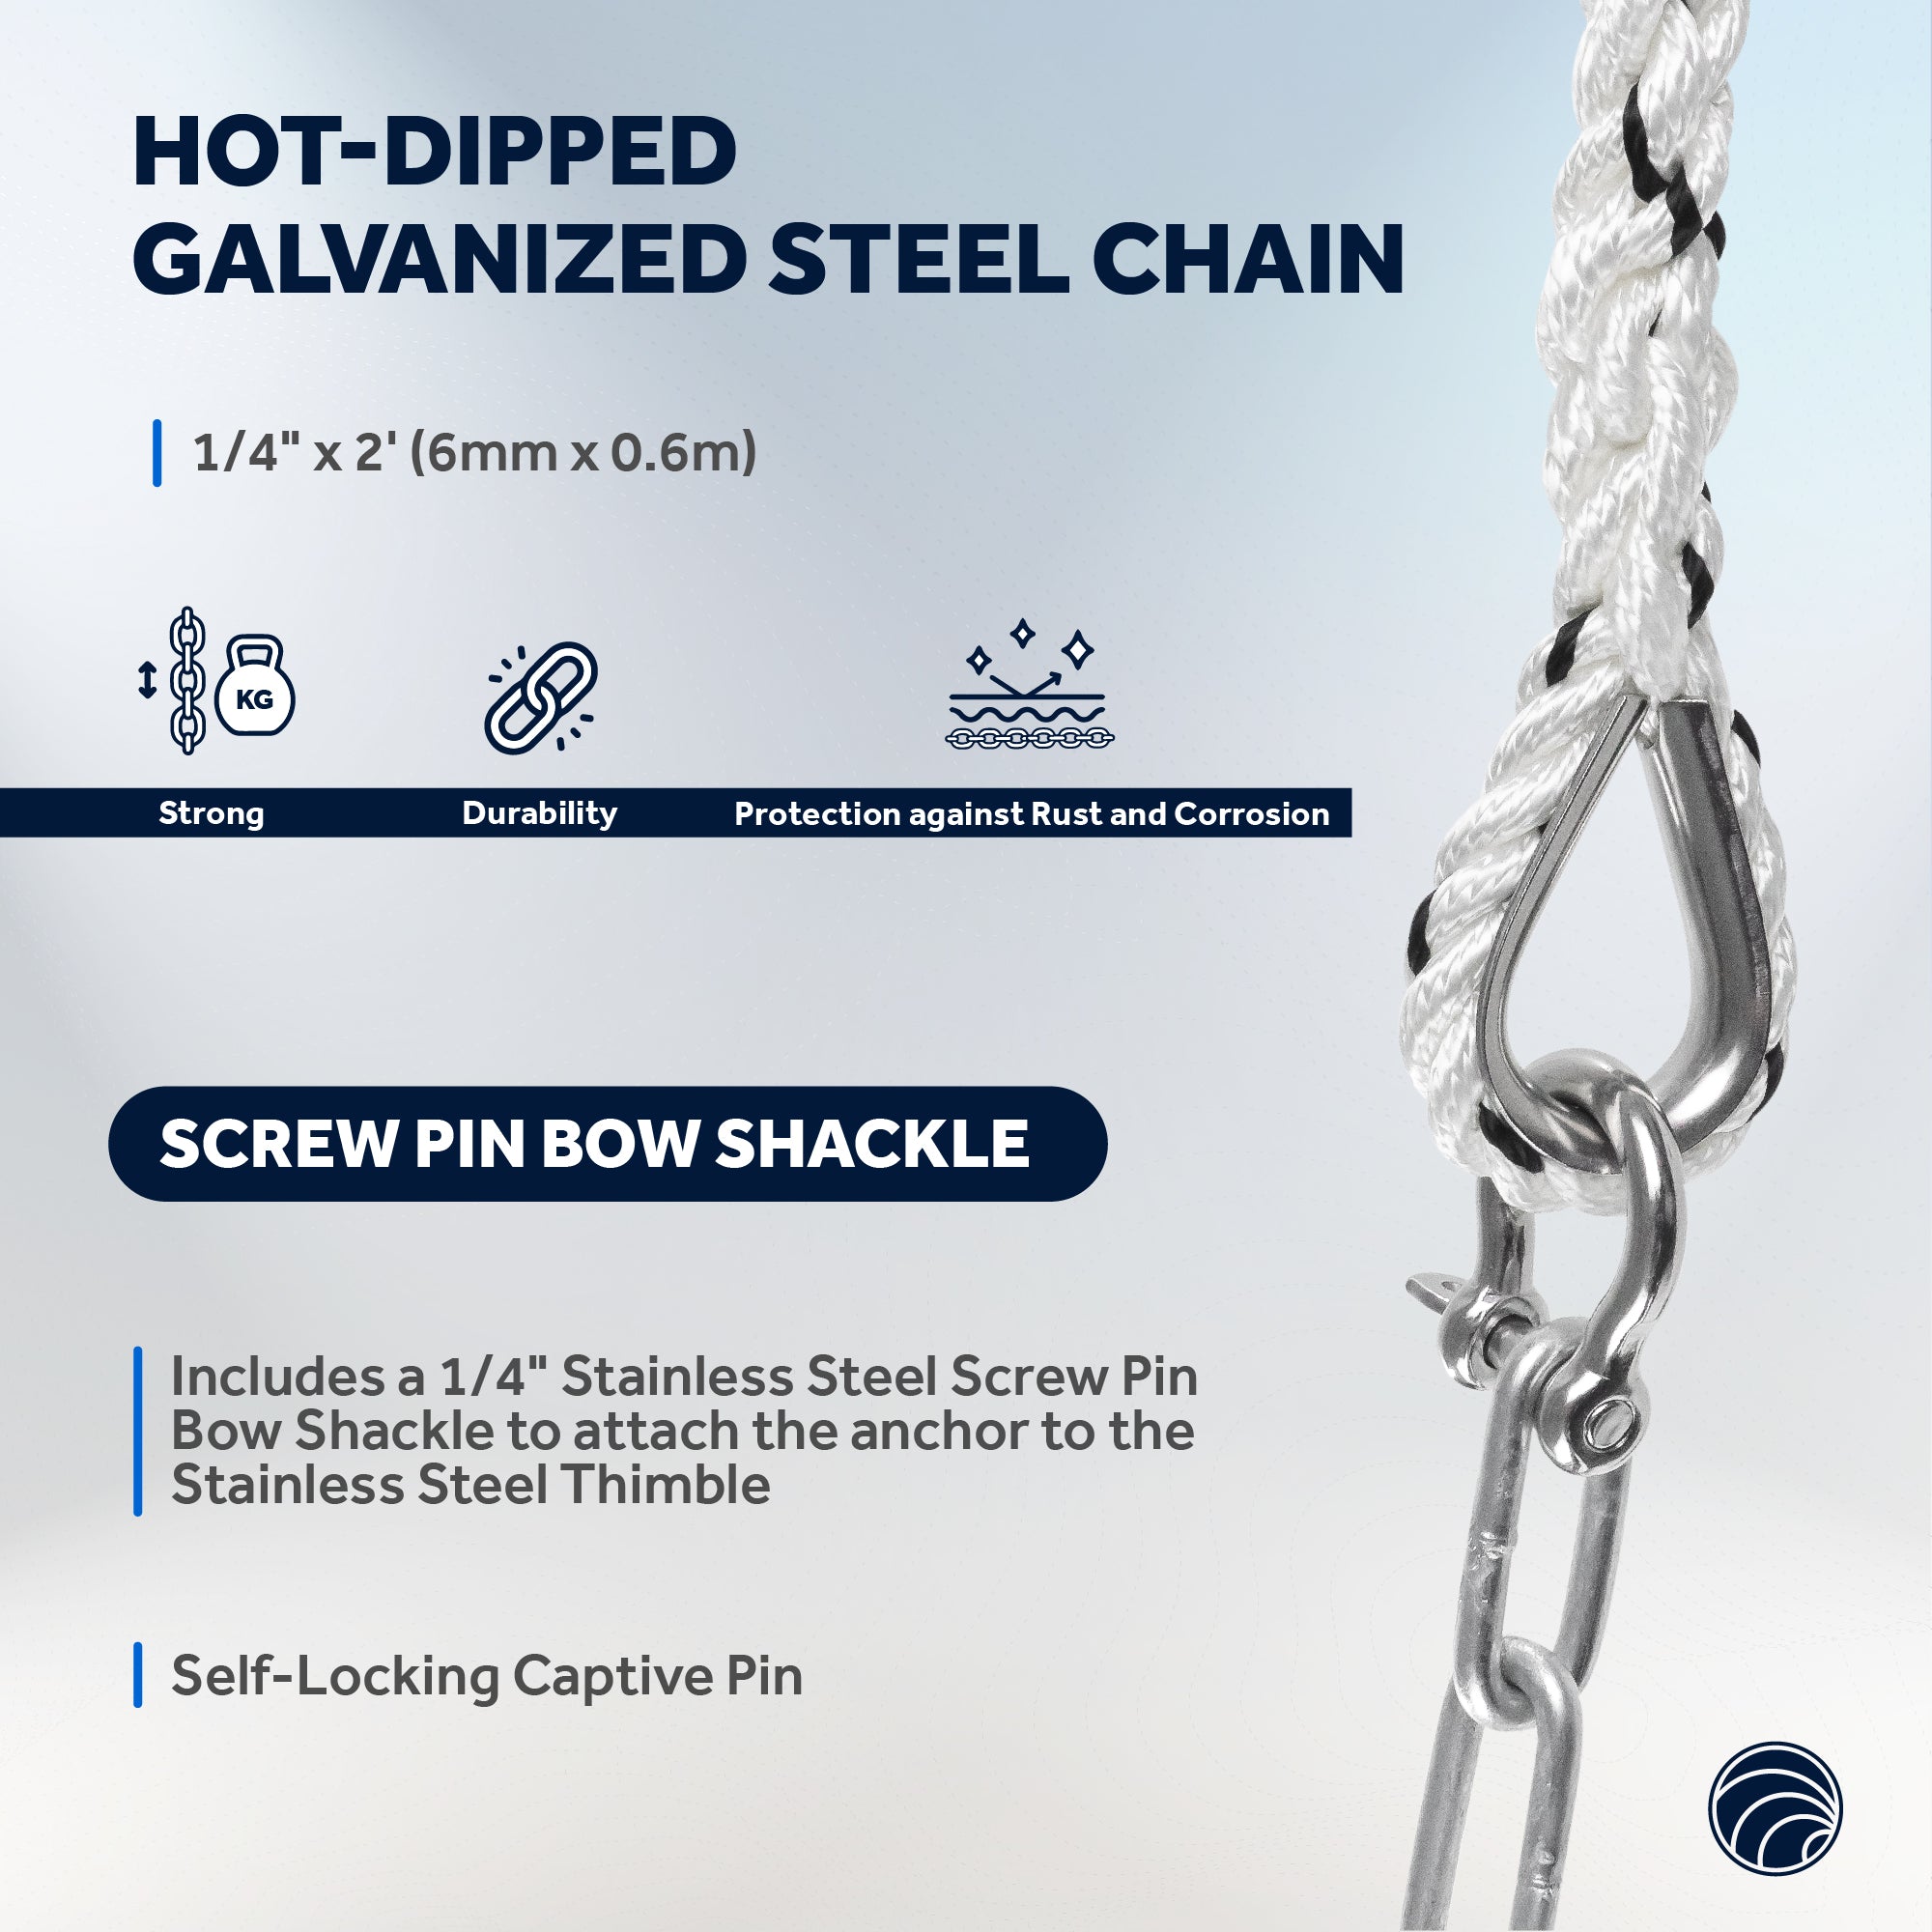 Anchor Rode, 5/16" x 75' Nylon 3-Strand Rope, 1/4" x 2' Hot Dipped Galvanized Steel Chain - FO4576